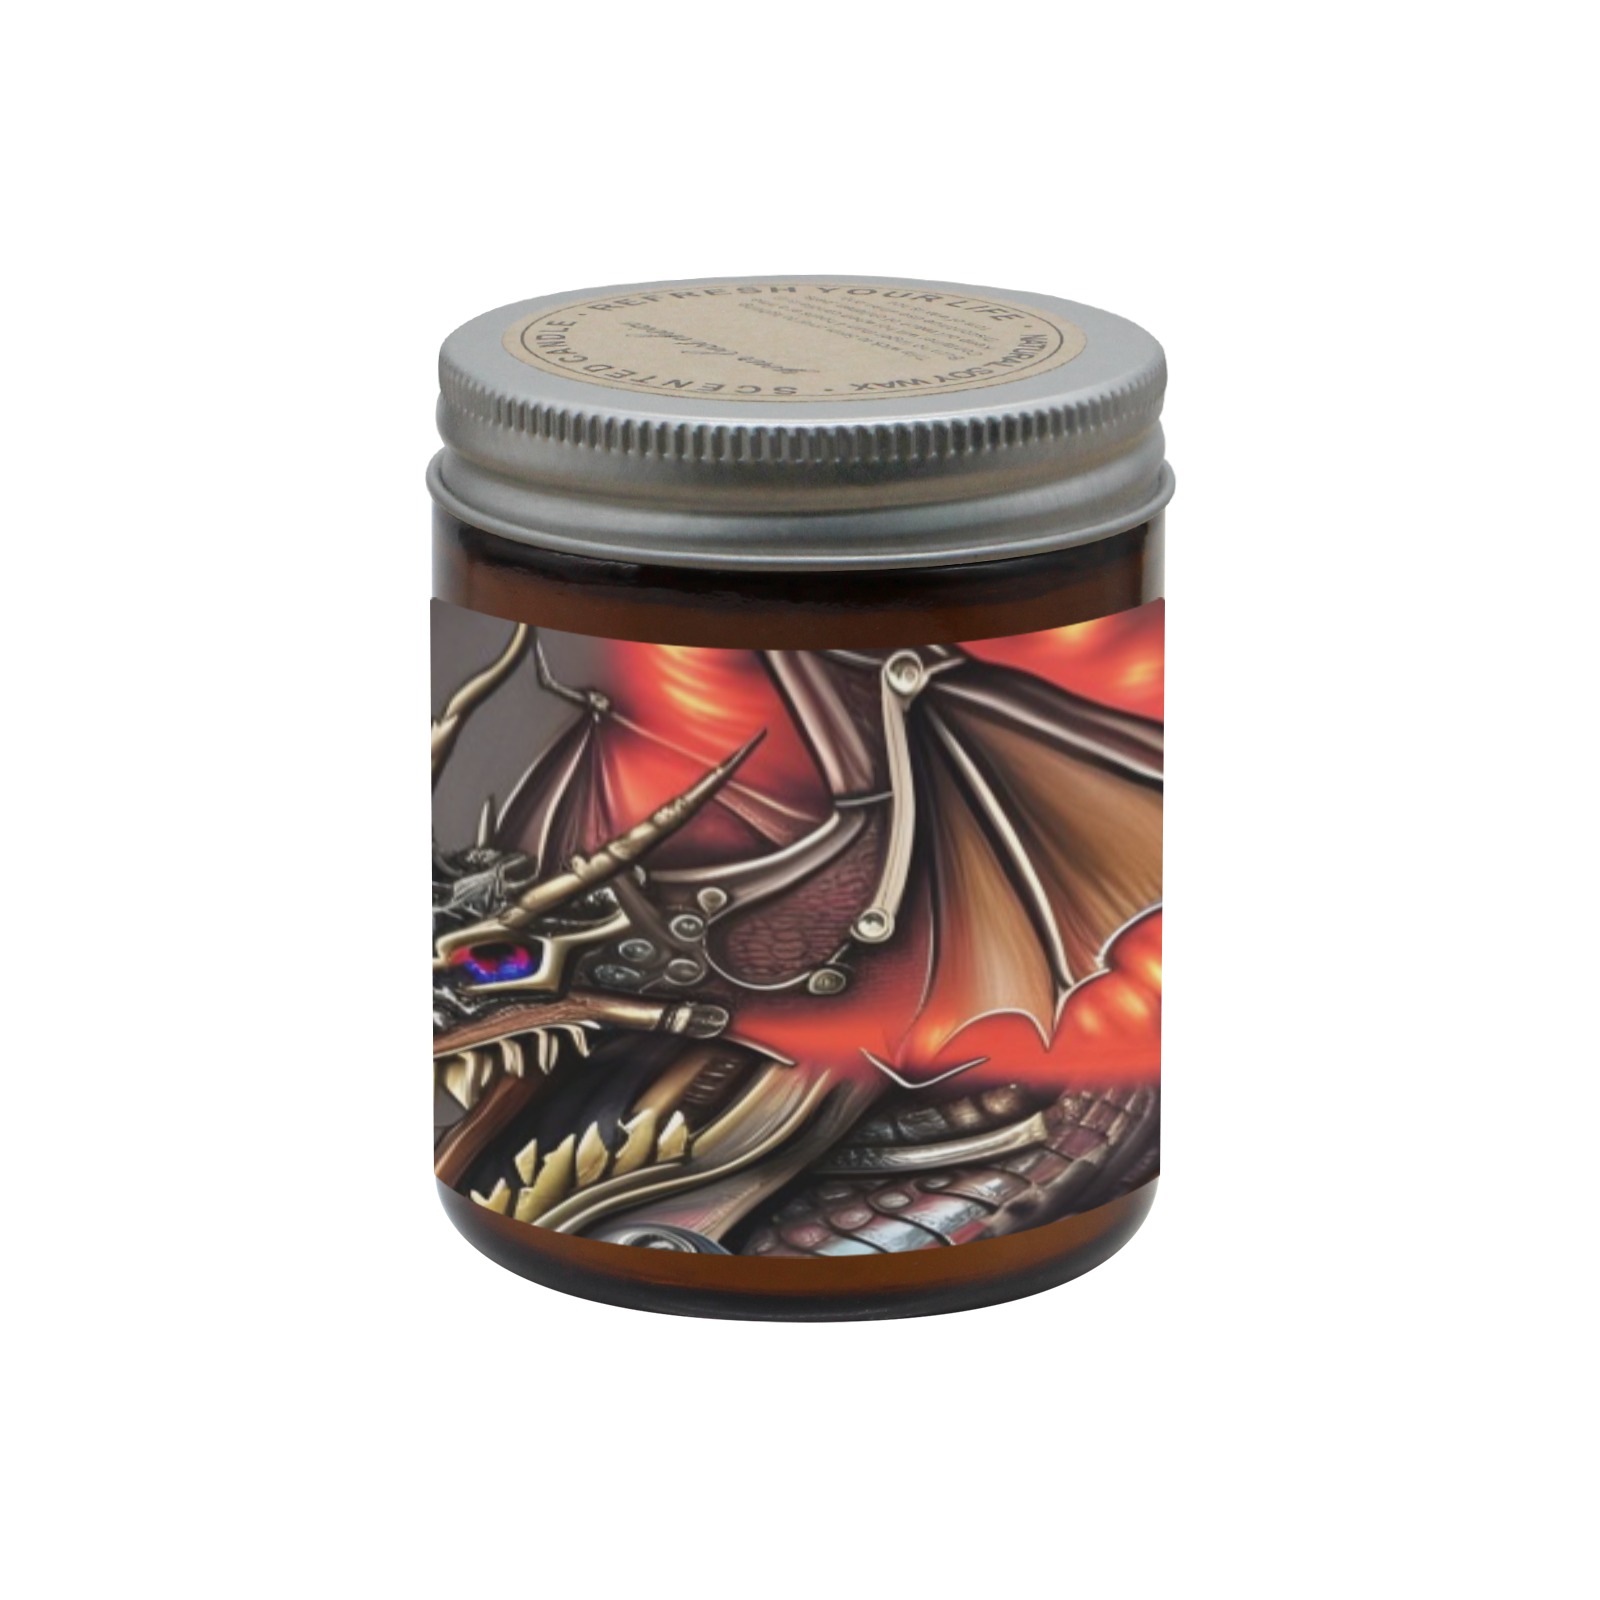 Steampunk Dragon Tawny Candle Cup - Large Size (Rose Sandal)